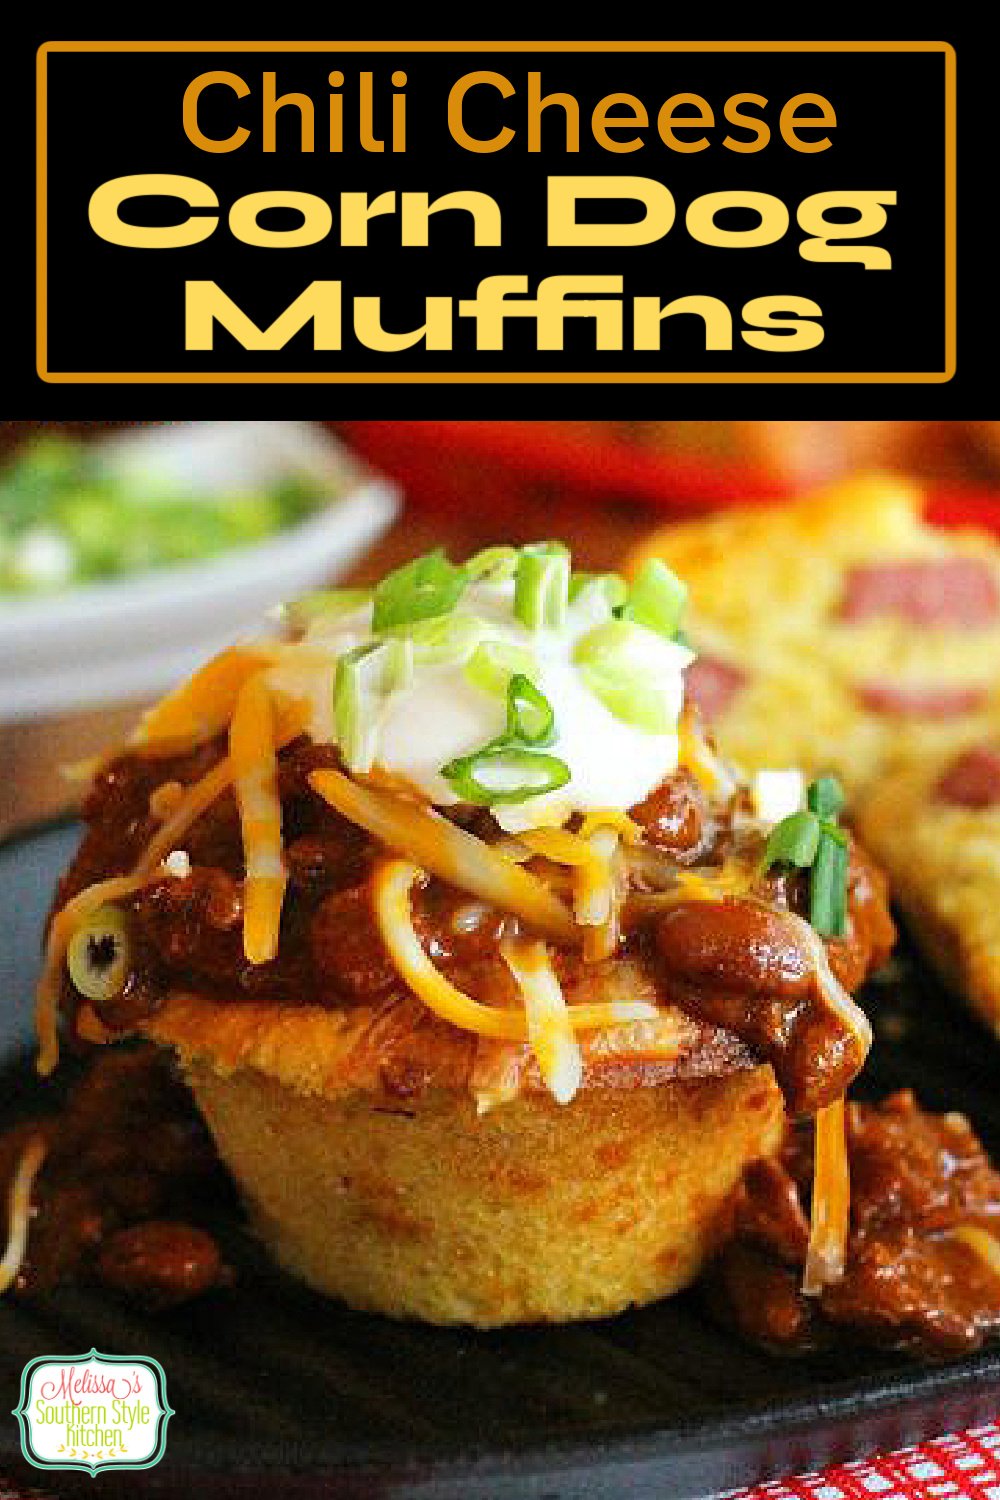 Chili Cheese Corn Dog Muffins combine all that we love about classic corn dogs smothered with beefy bean chili, sour cream and cheddar cheese #corndogs #corndogmuffins #cornbread #dinner #muffinrecipes #food #dinnerideas #chili #chilicheesedogs #southernrecipes #hotdogs via @melissasssk